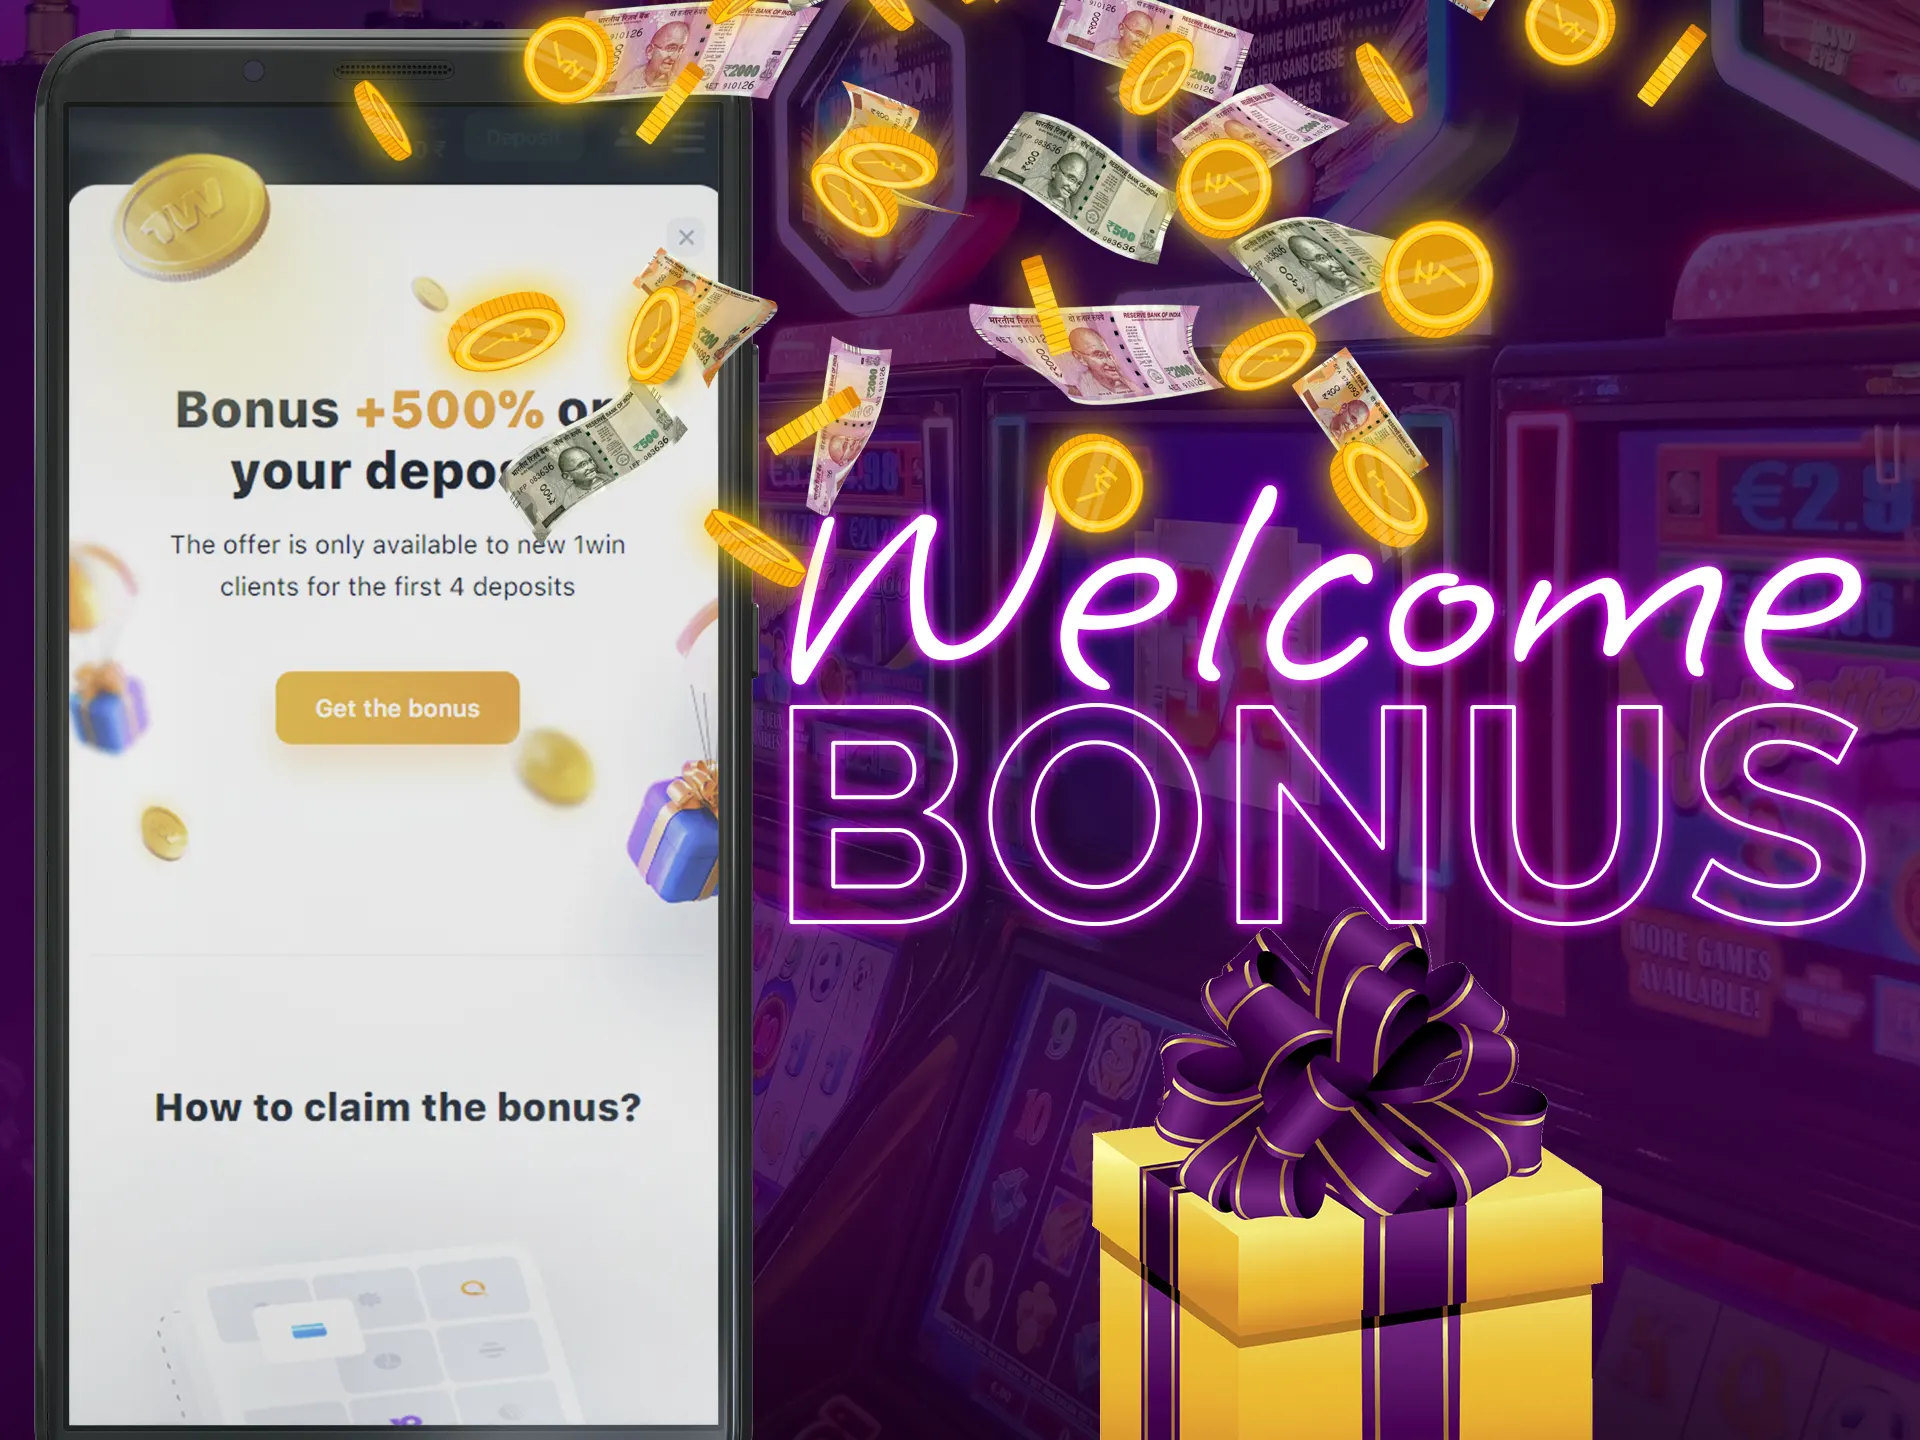 New players receive a welcome bonus.